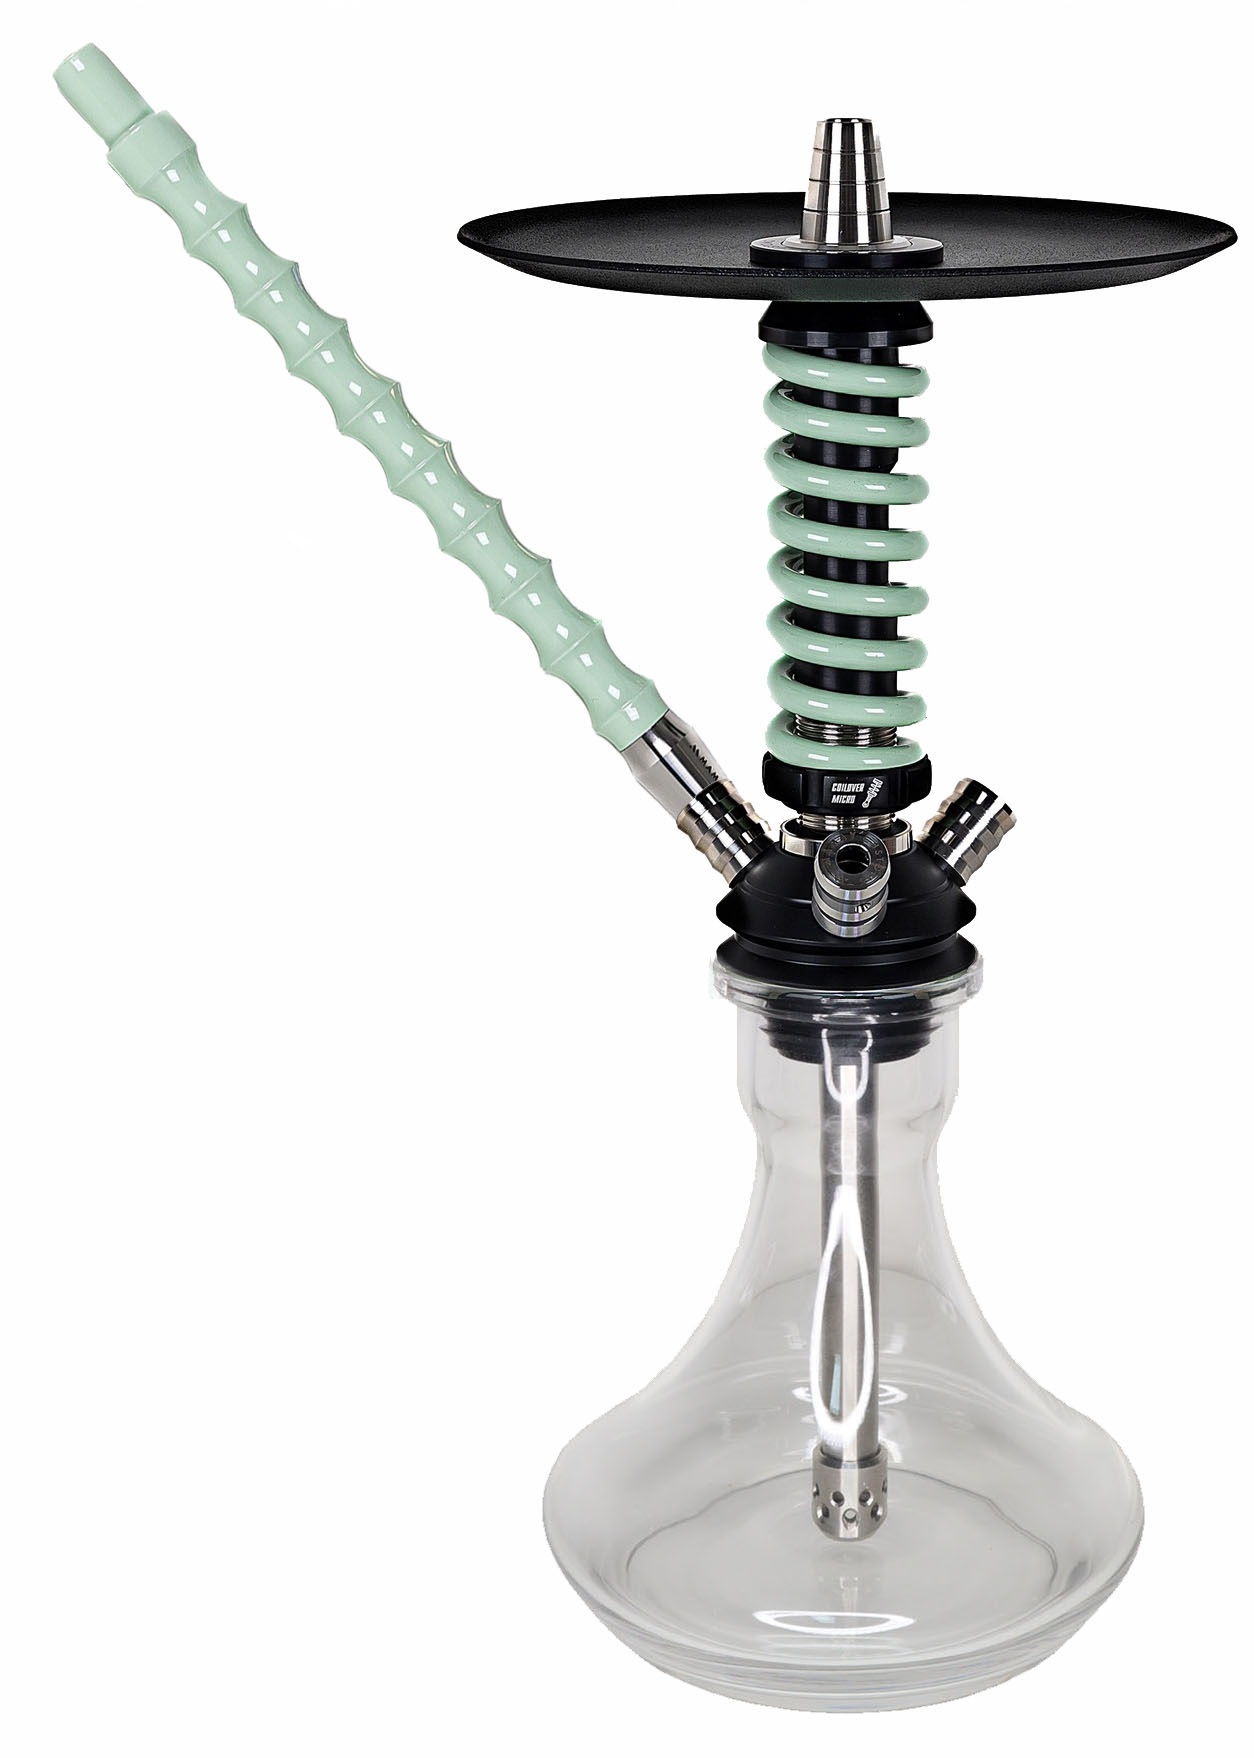 Narghilea Mamay Customs Coilover Micro Mint-silver + Vas